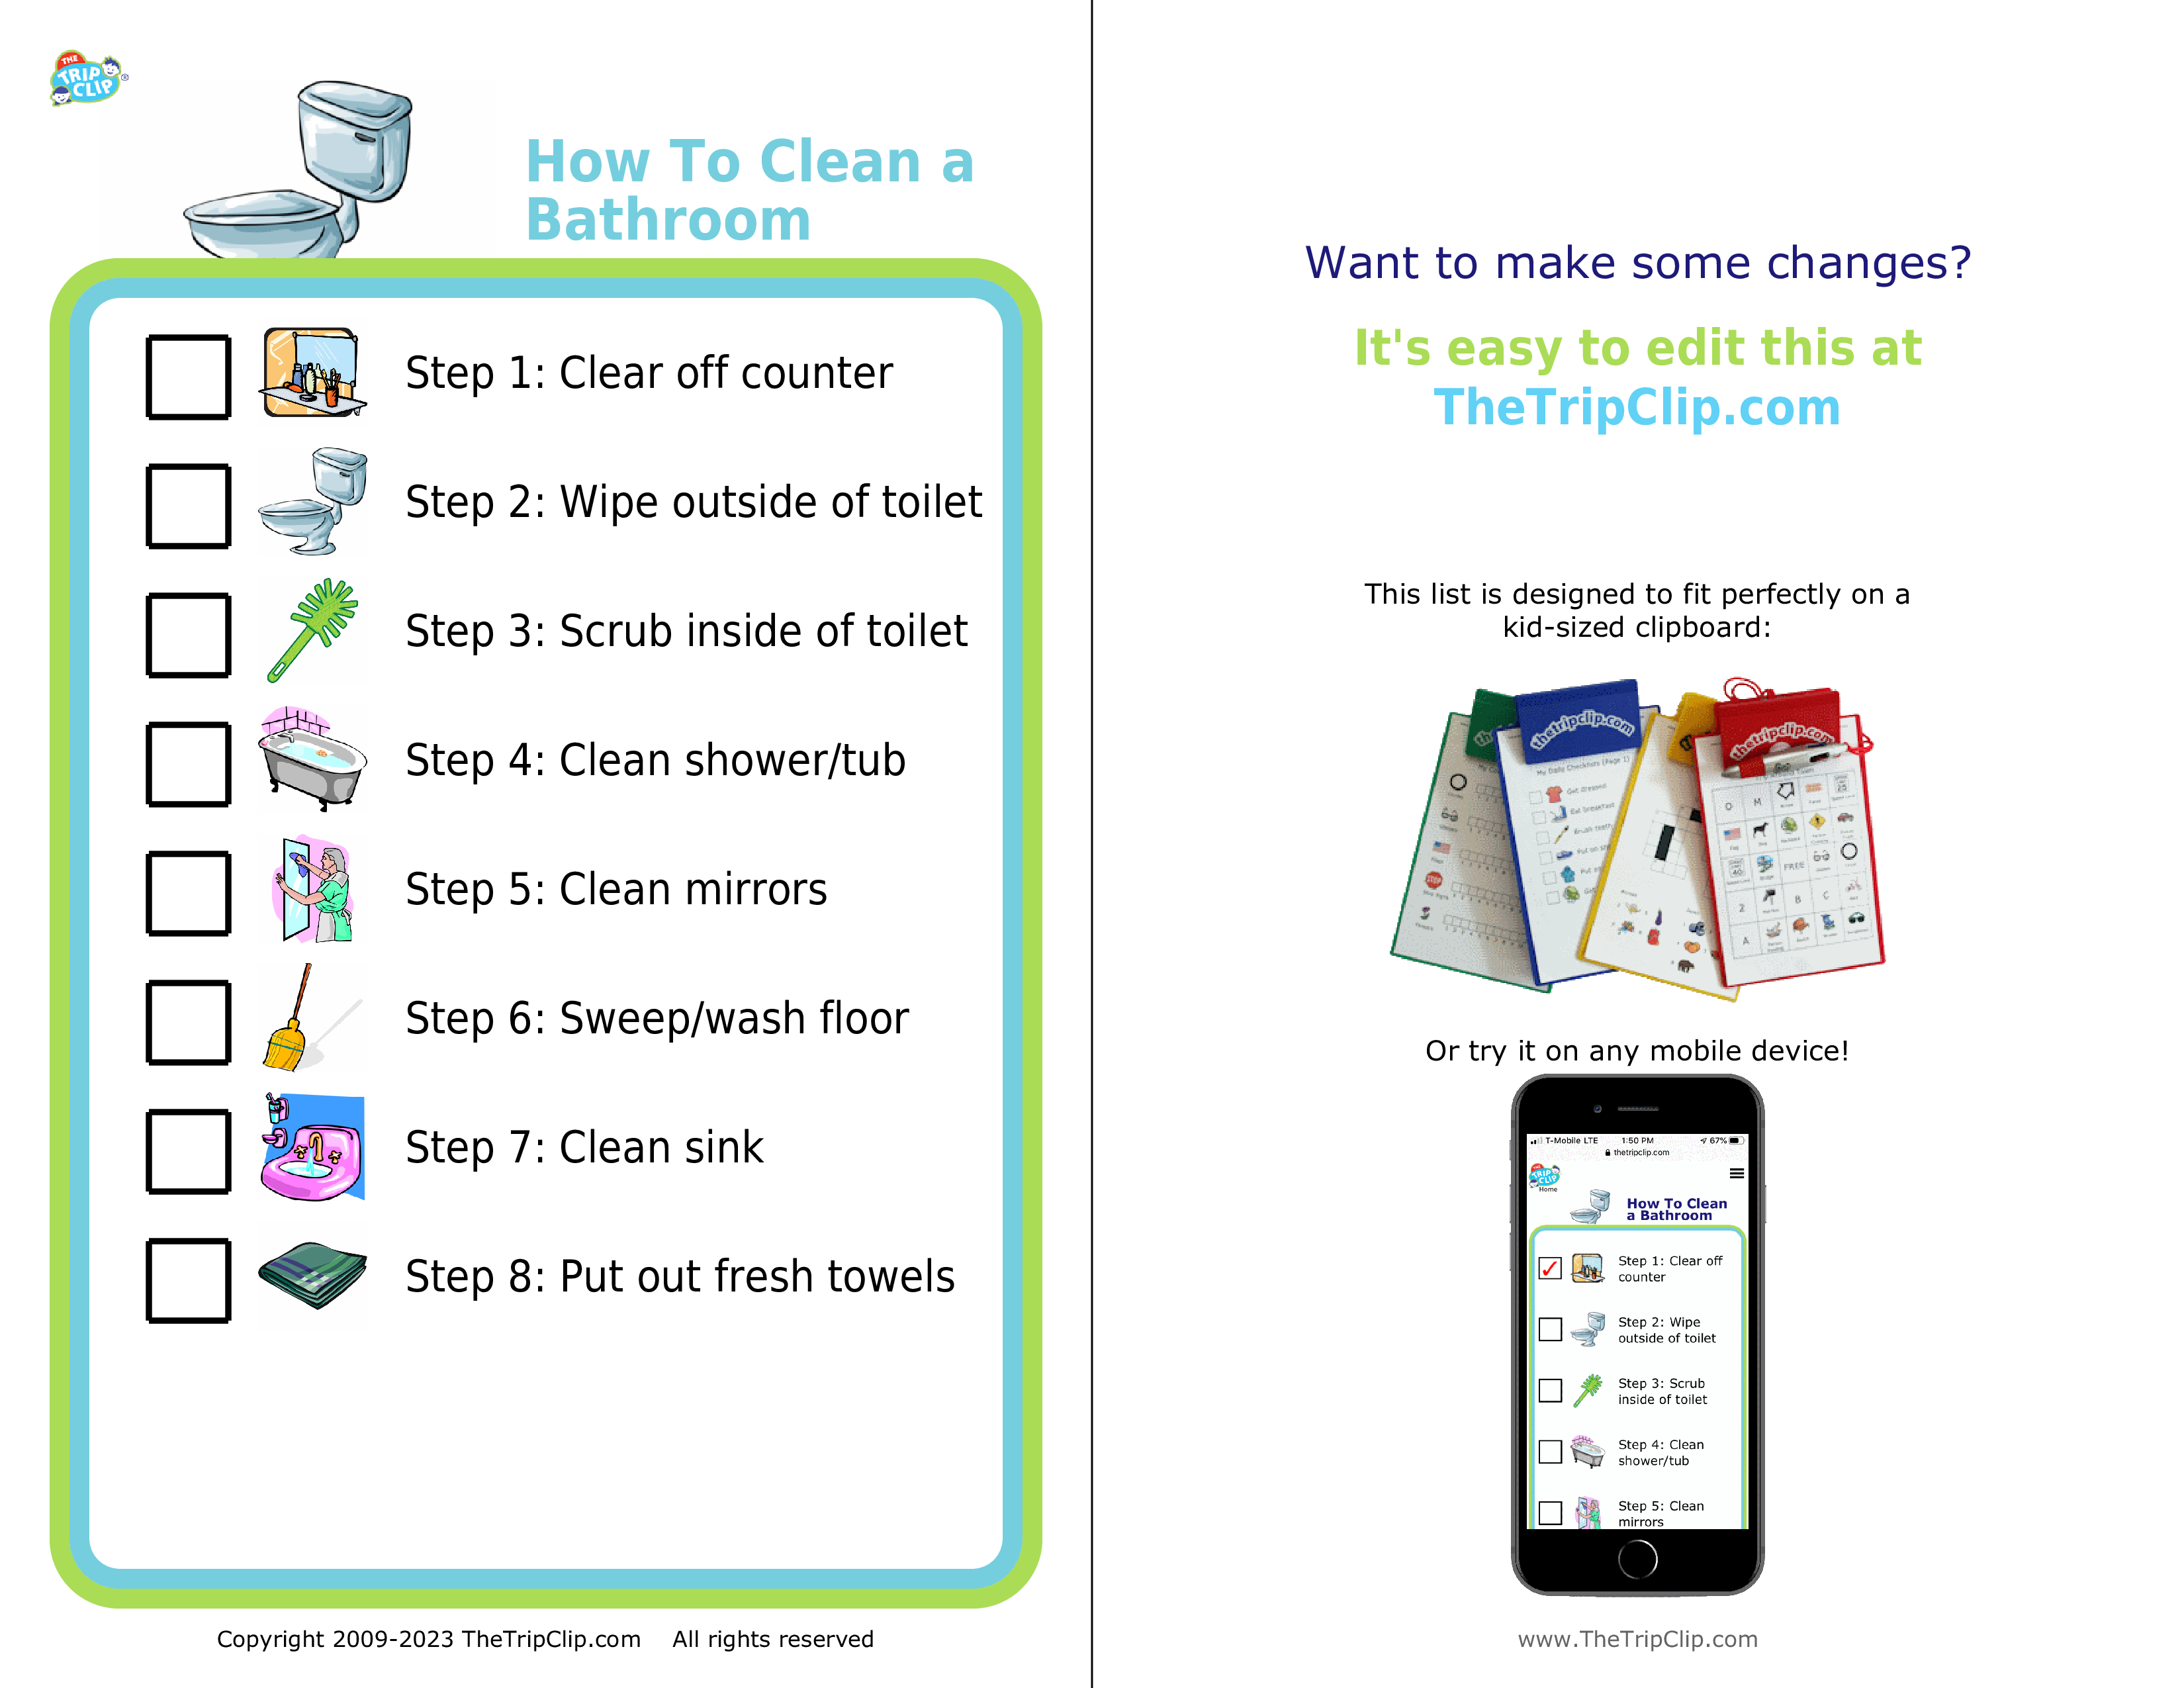 Picture checklists to teach a kid to clean a bathroom in 8 steps